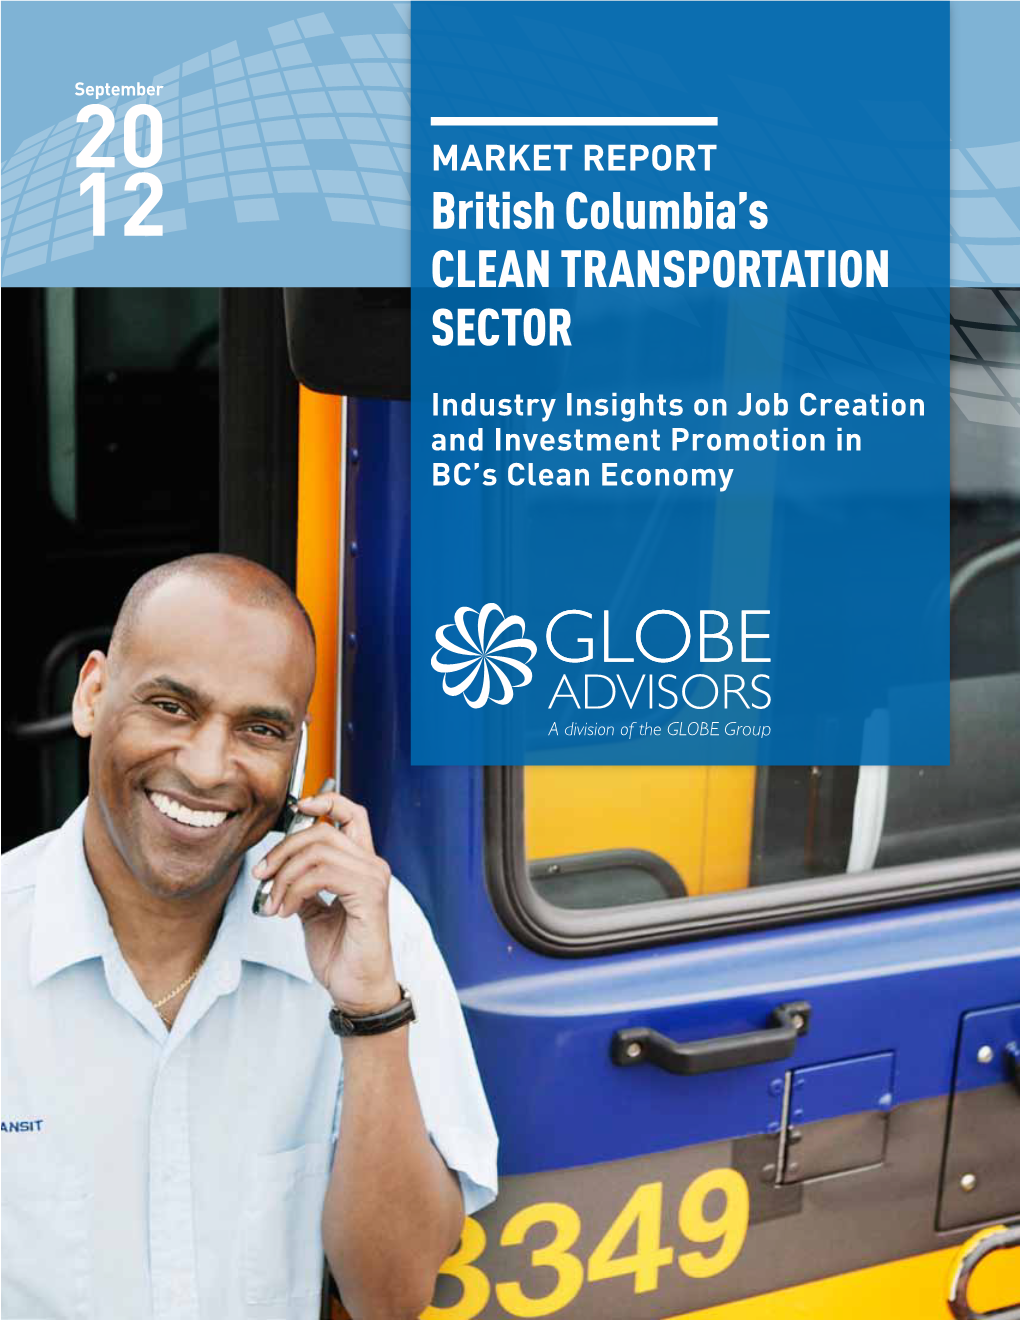 British Columbia's CLEAN TRANSPORTATION SECTOR